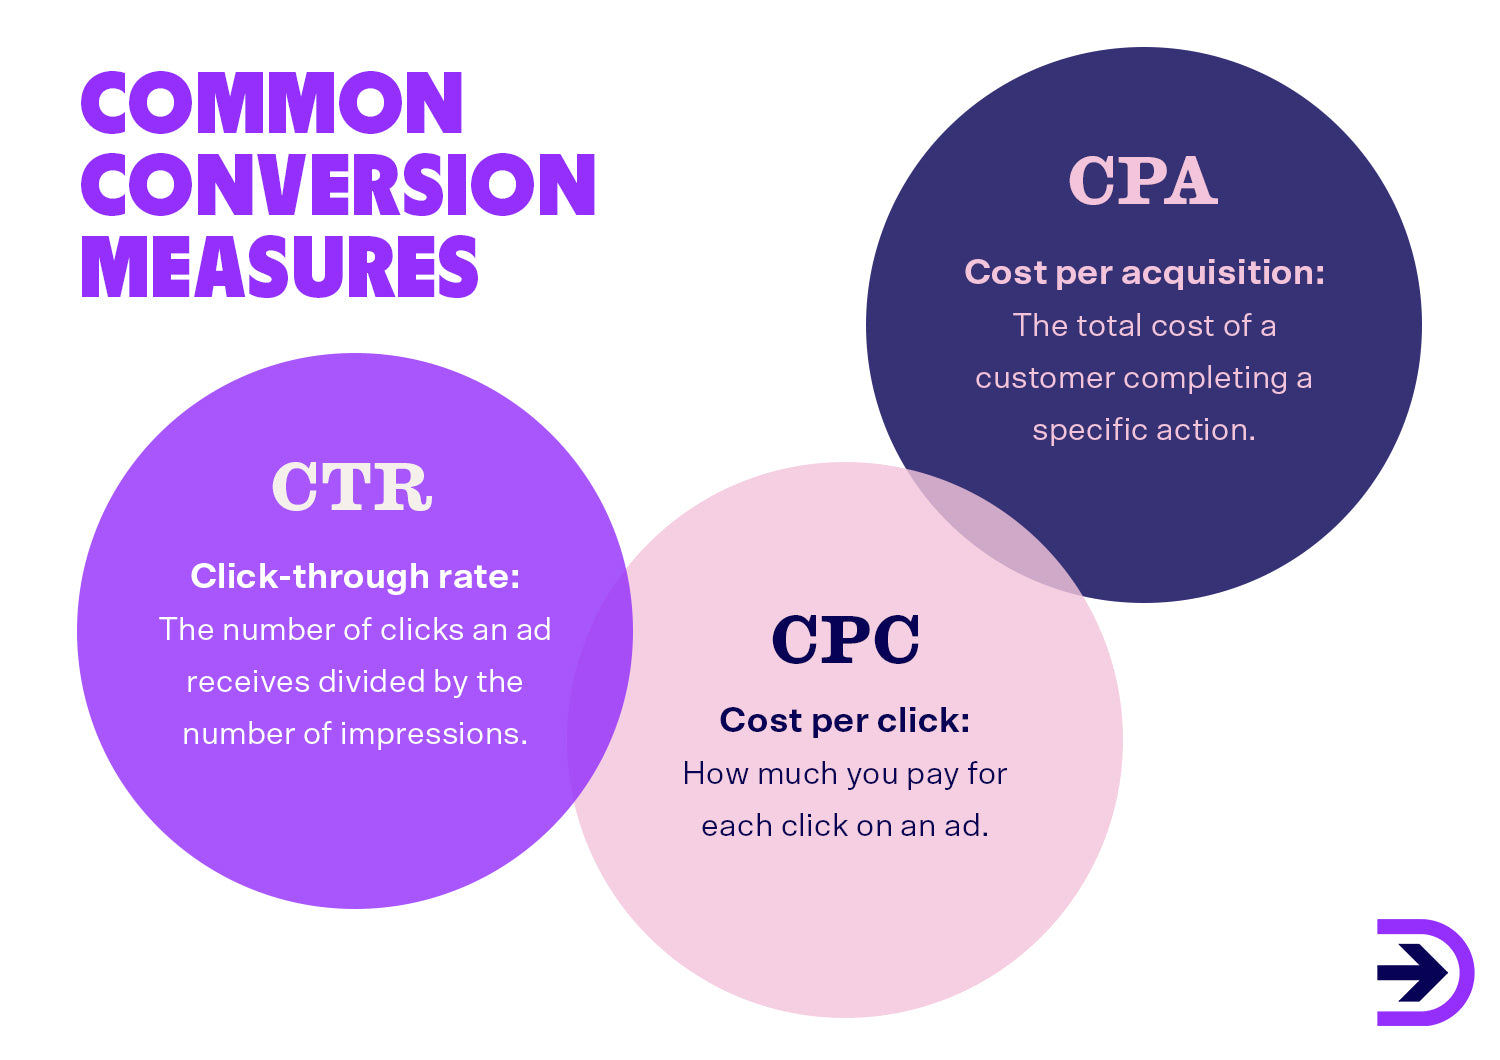 Set conversion goals for your ecommerce business by researching your click-through rate, cost per click and cost per acquisition.